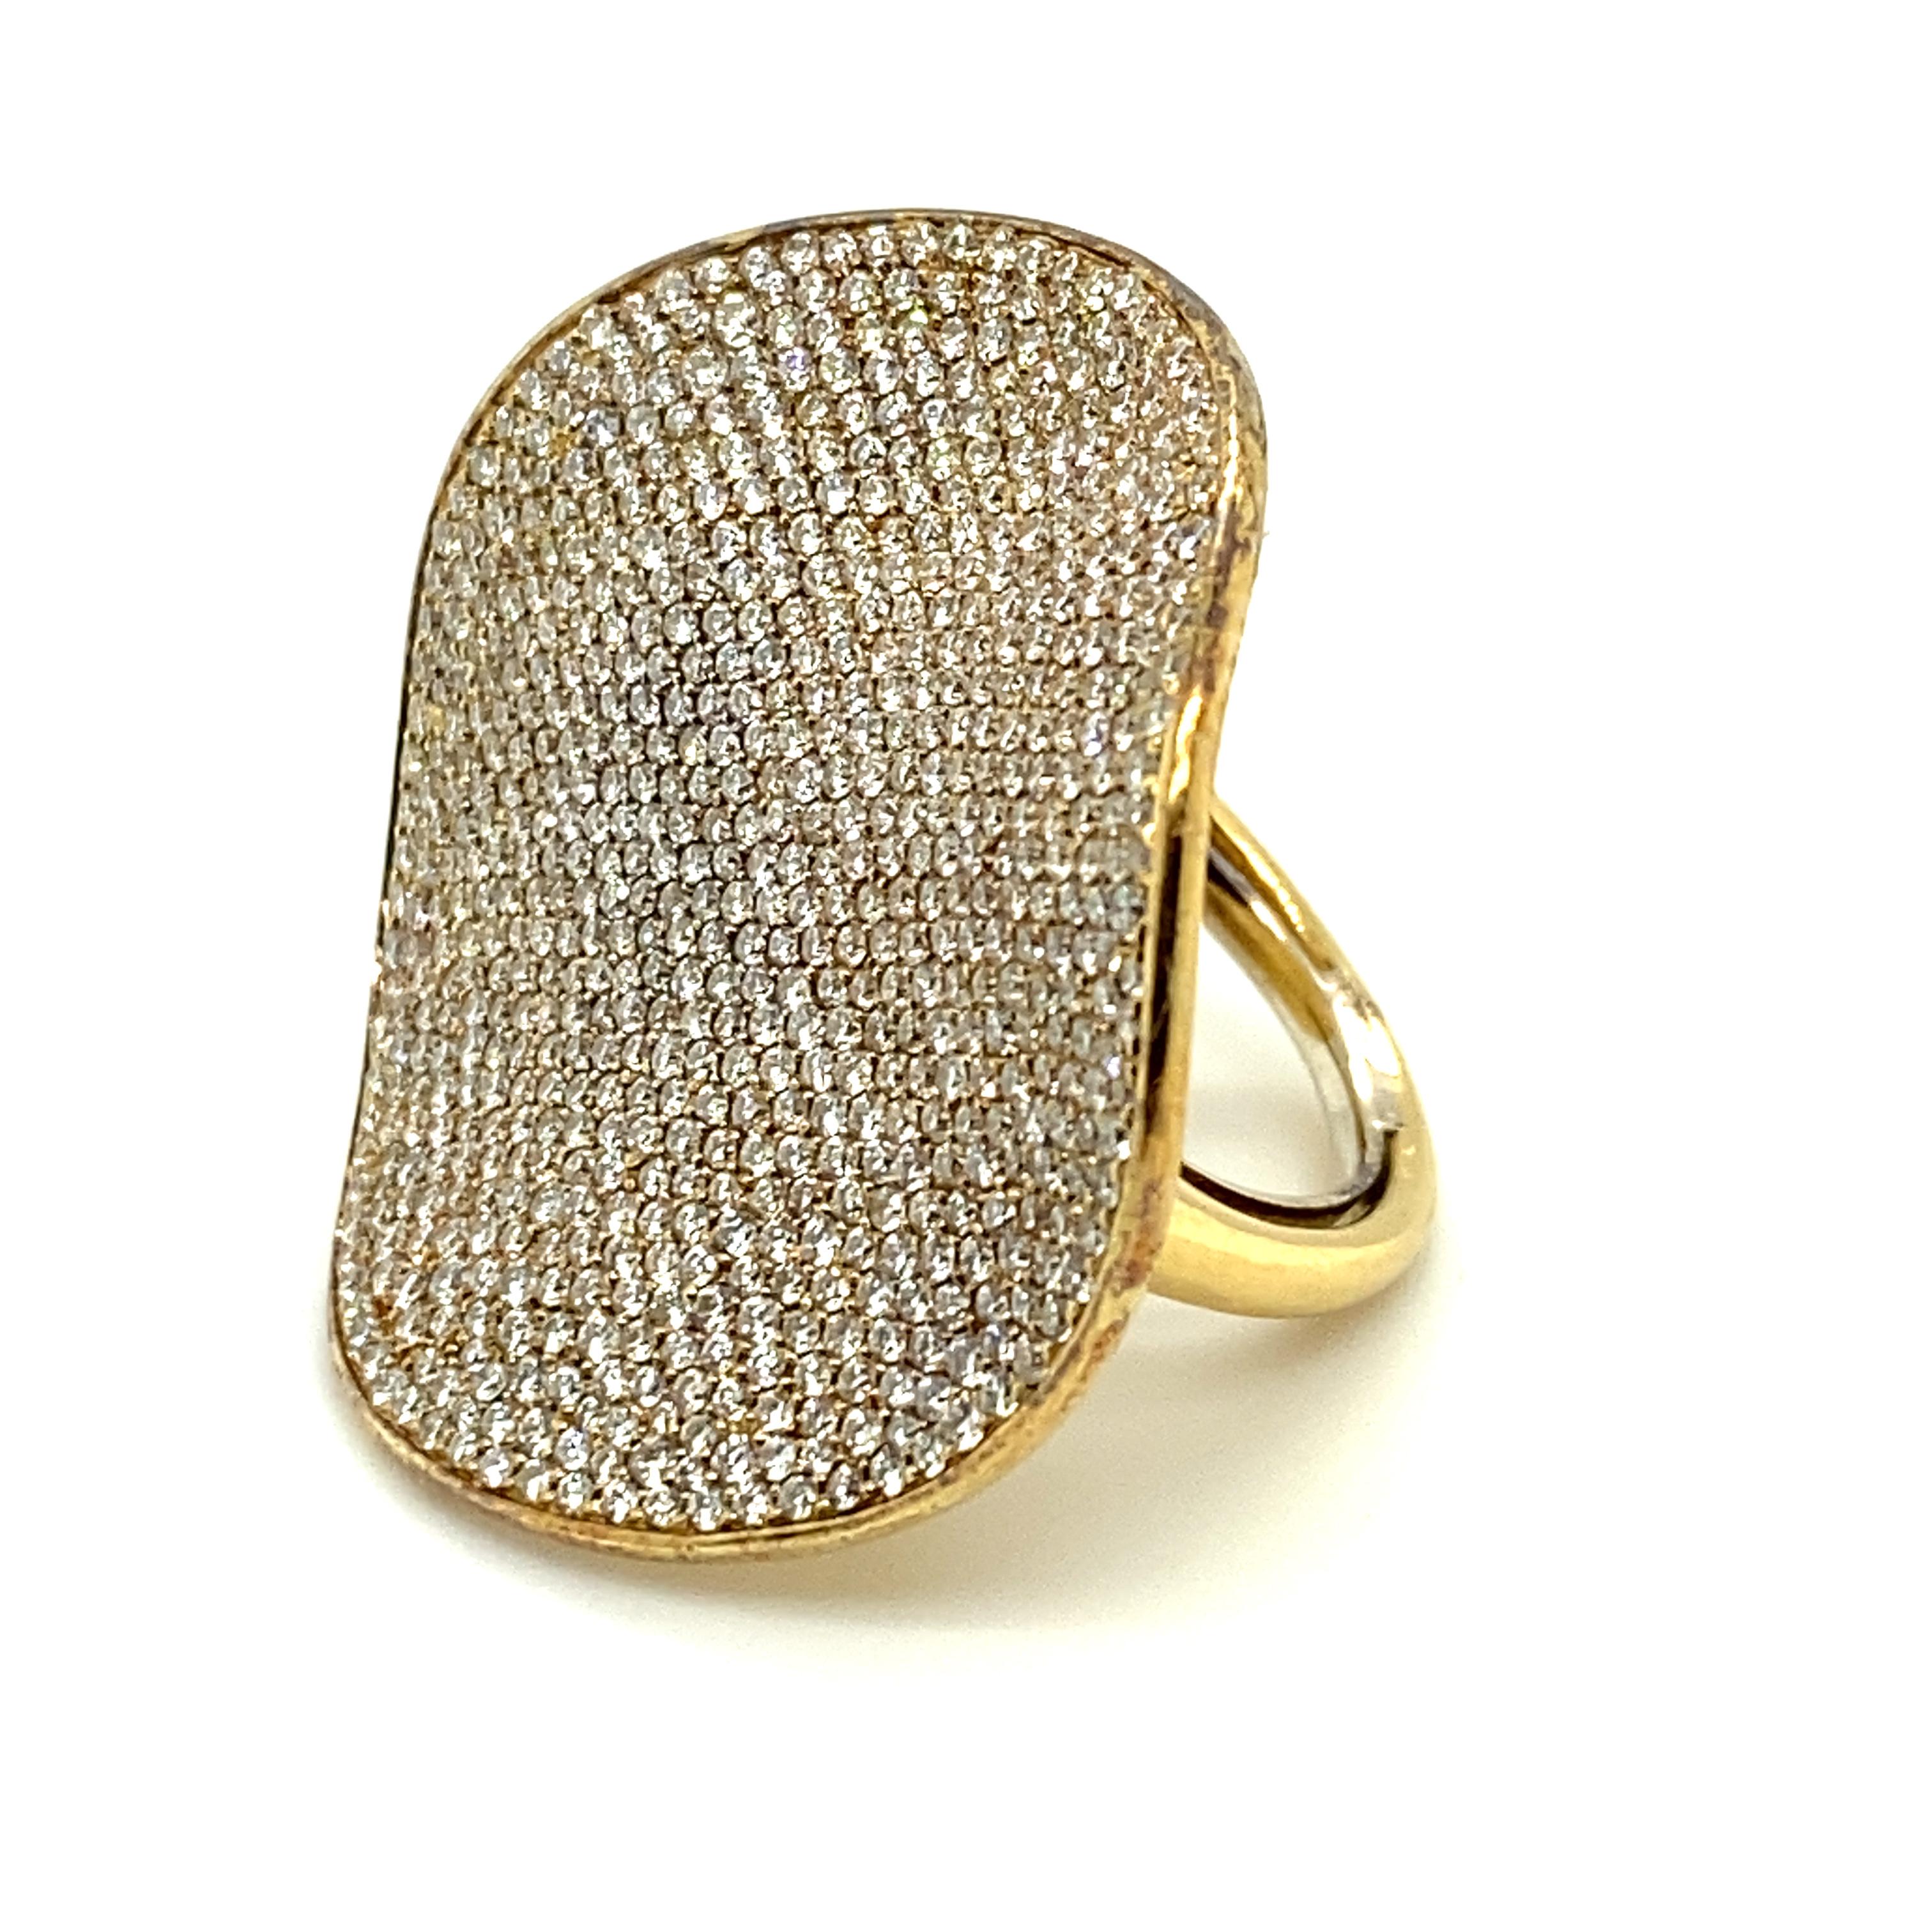 This Ippolita ring from the Stardust collection contains approximately 2.86cts of pave-set diamonds angled on a curved surface reminiscent of flower petals.  This Large 18k Flower Ring model, which contains diamonds of G-H color and SI clarity,